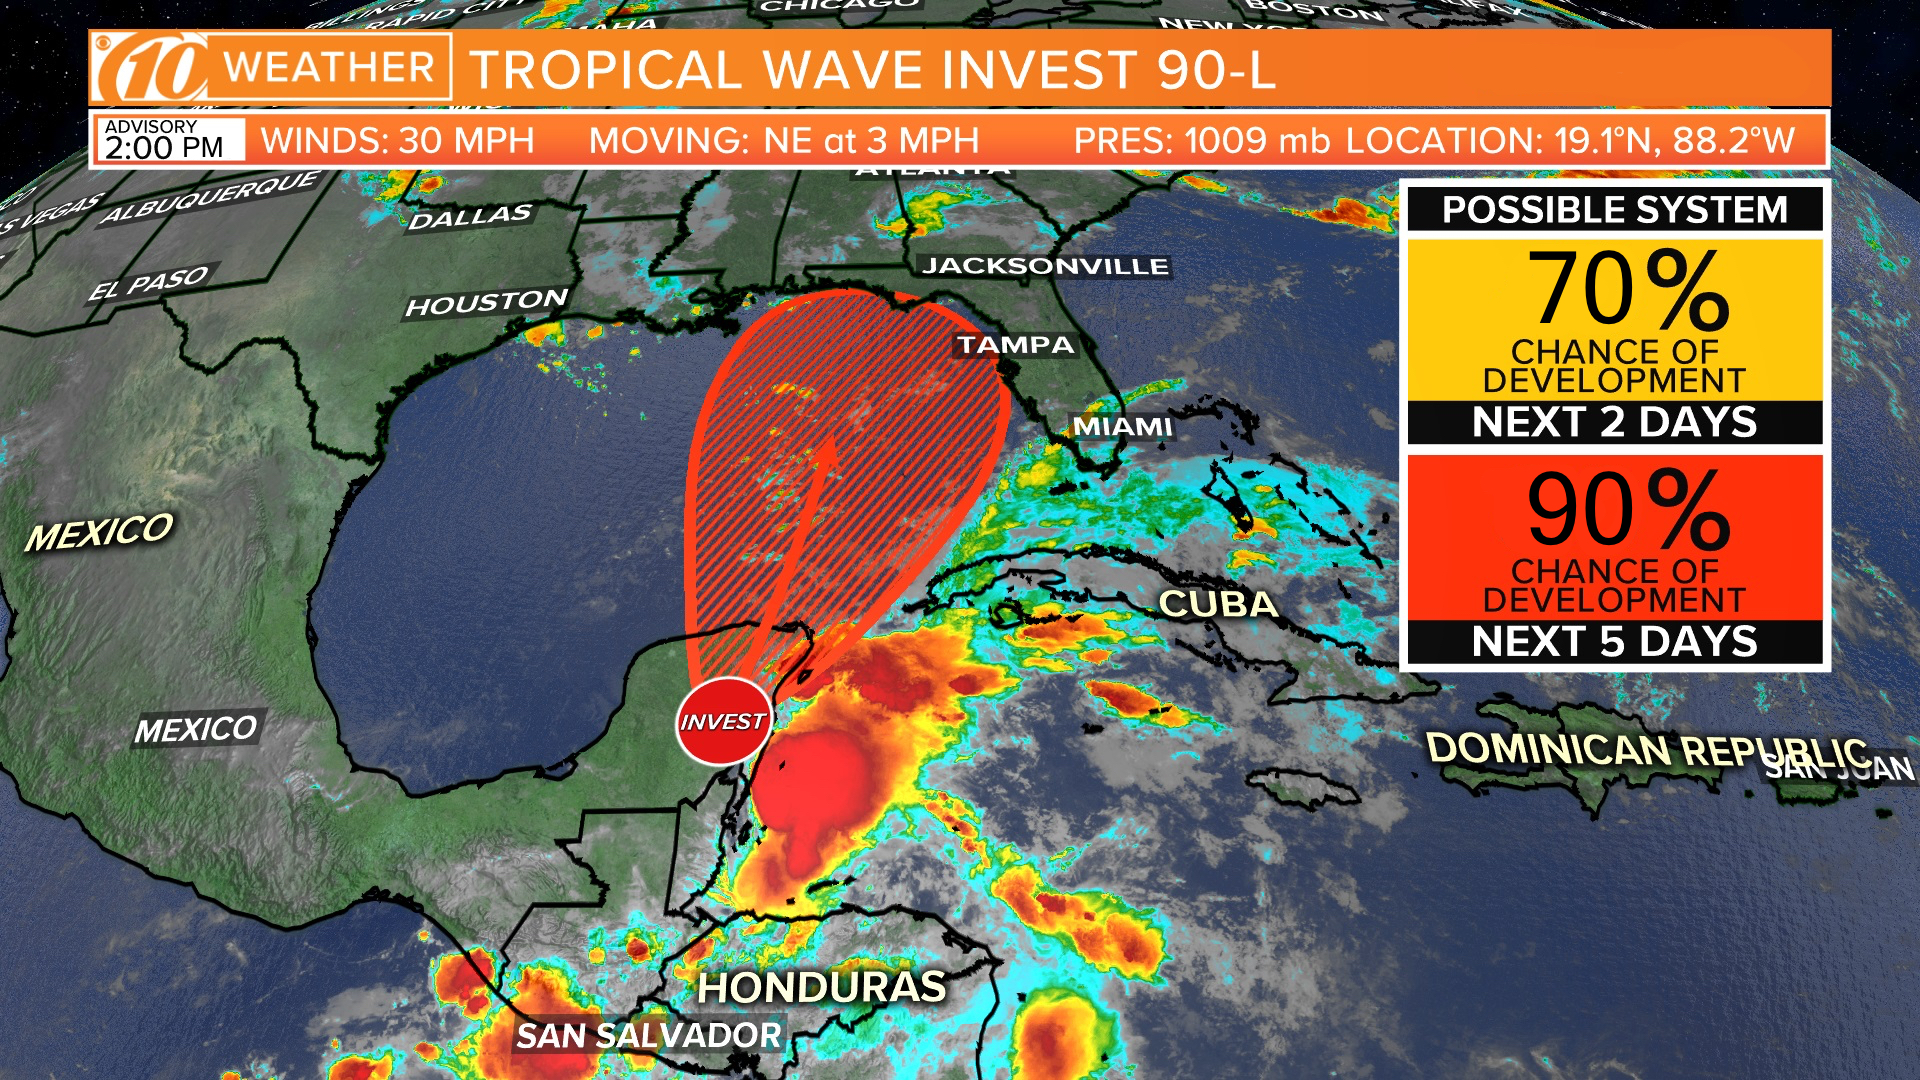 National Hurricane Center: 90% chance of tropical development for system moving into Gulf